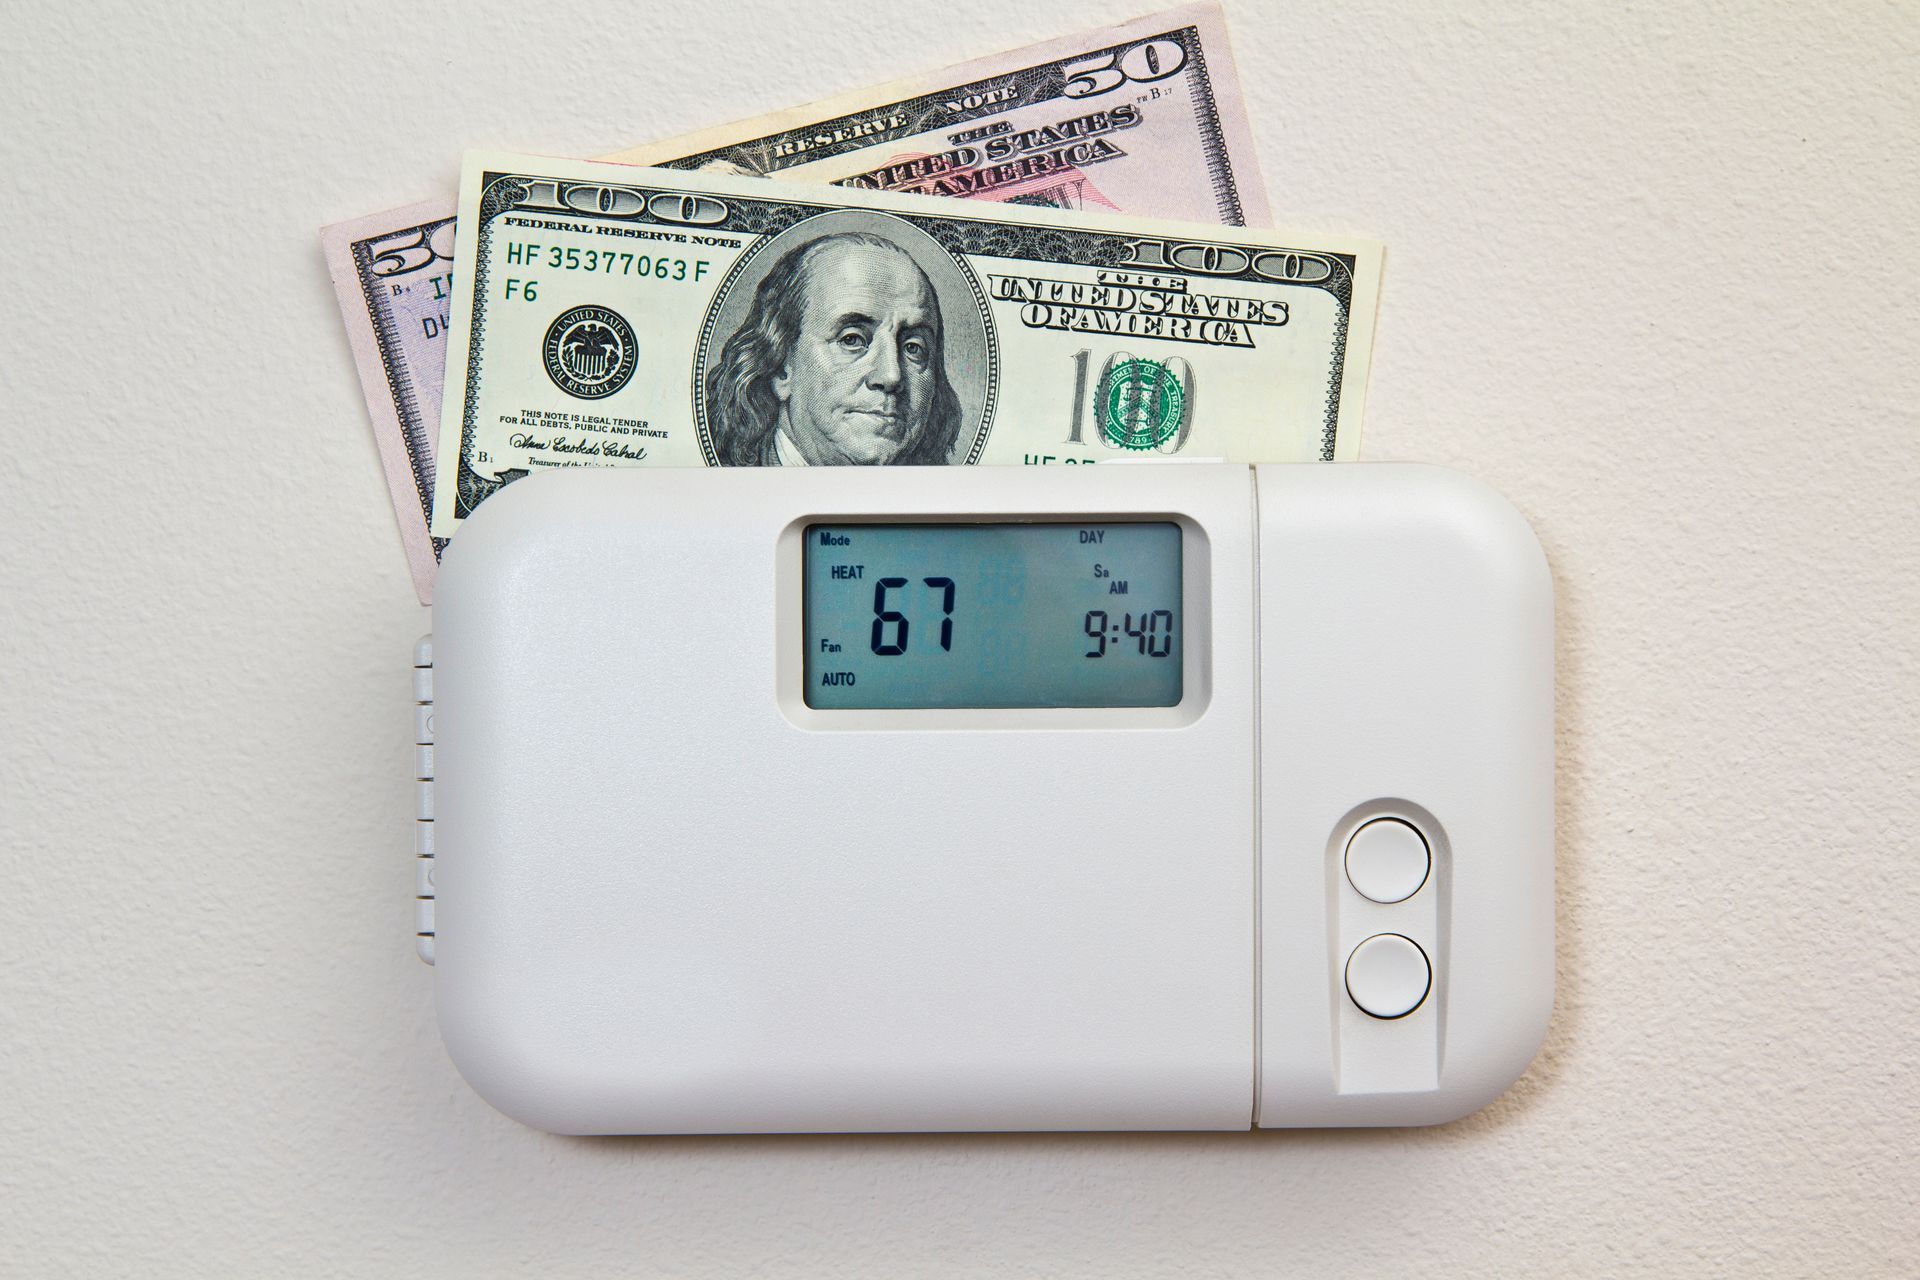 money stuffed into a thermostat